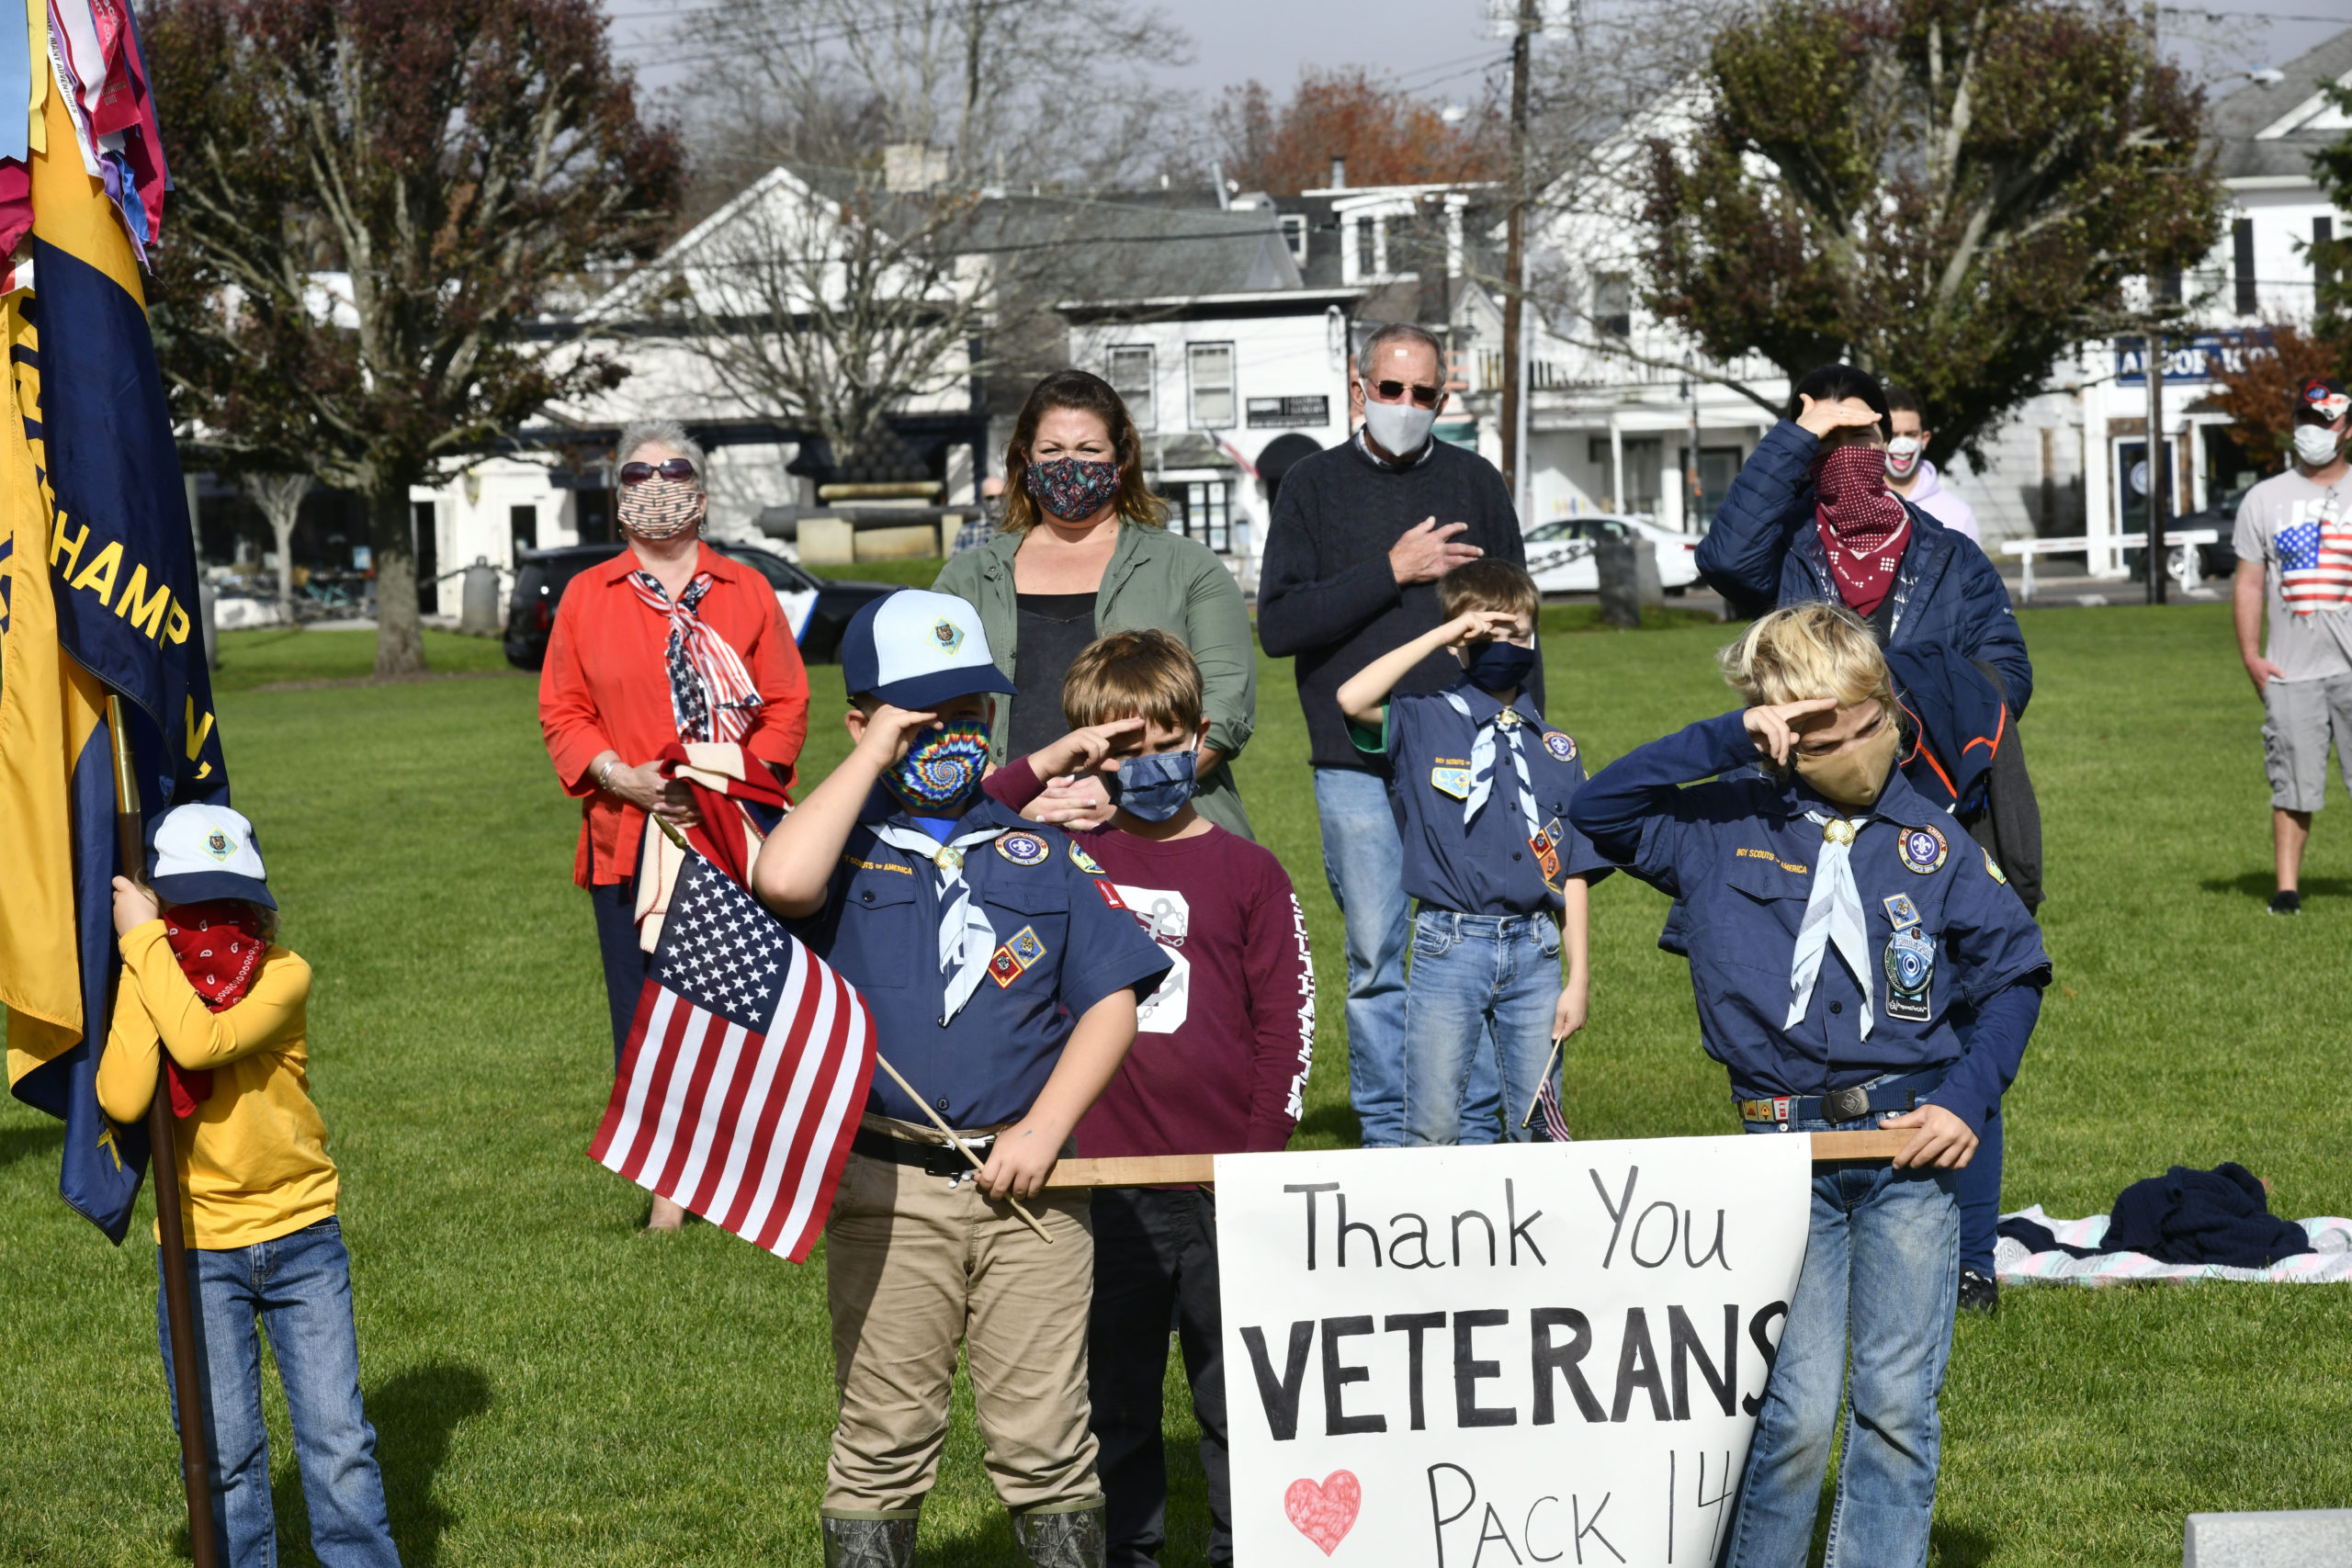 Veterans Day services were hled in Agawam Park in Southampton Village on Wednesday, November 11.